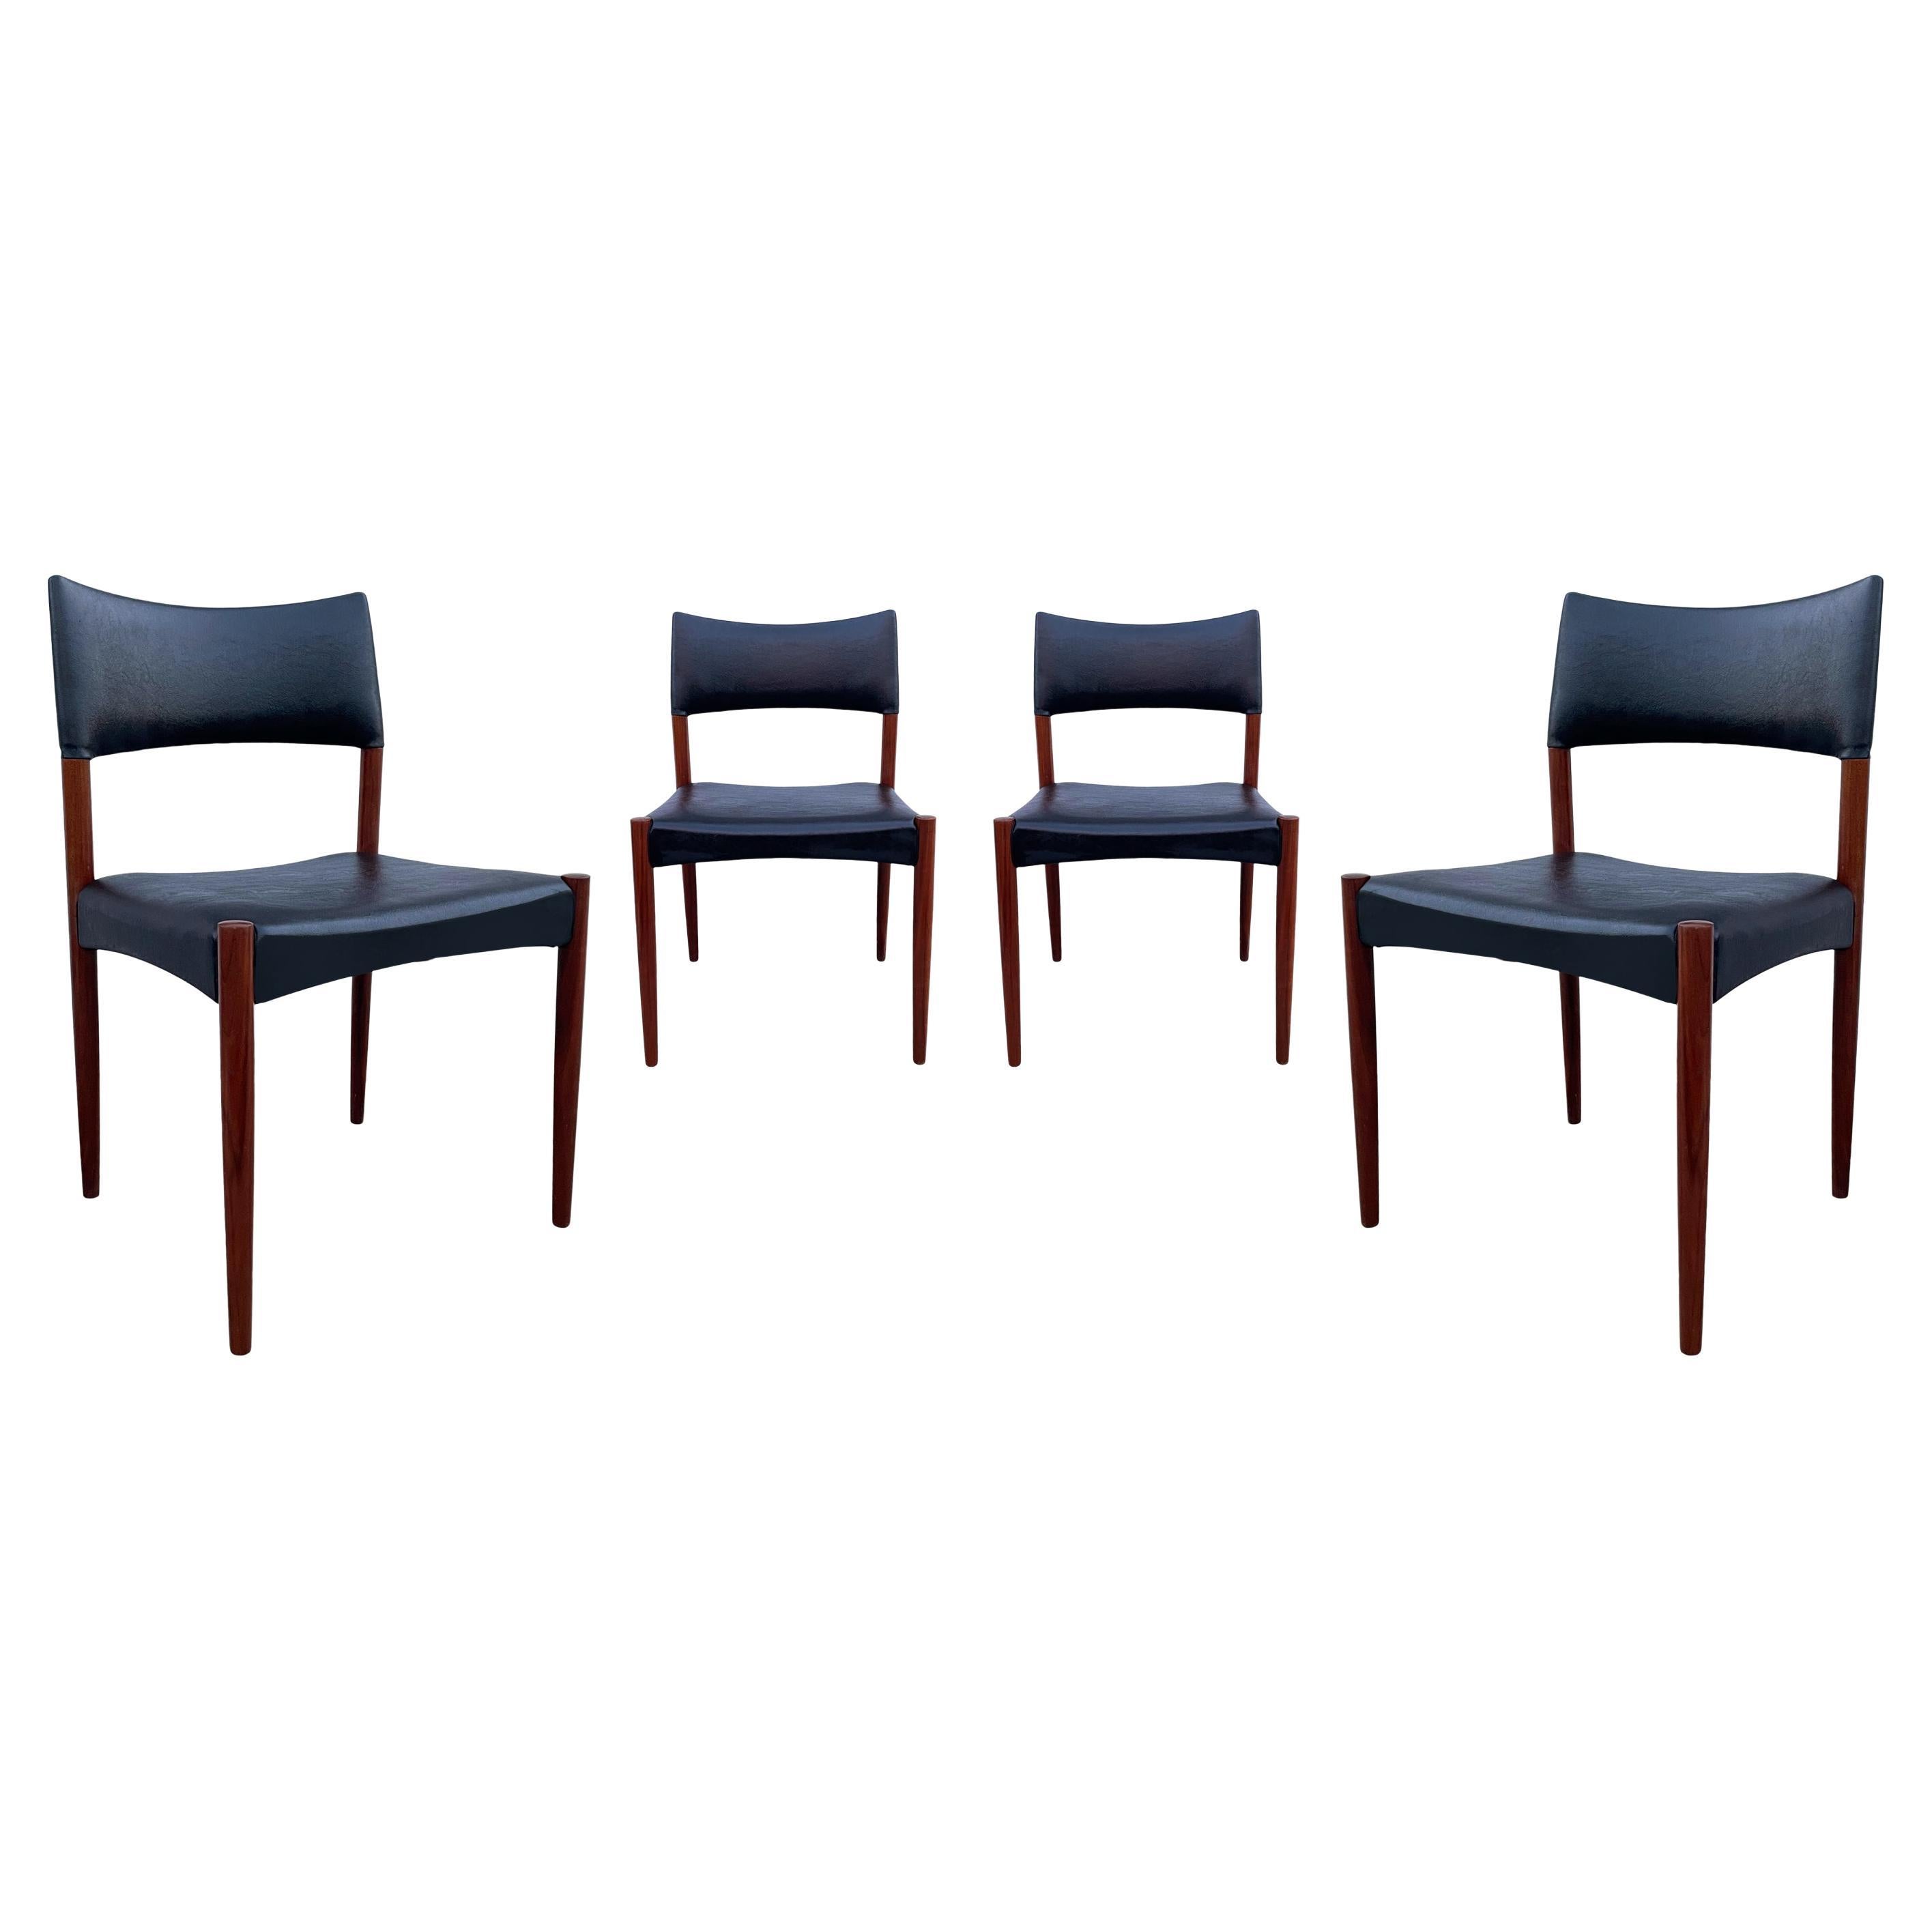 Set of 4 Mid Century Danish Modern Dining Chairs in Teak by Villy Schou Andersen For Sale